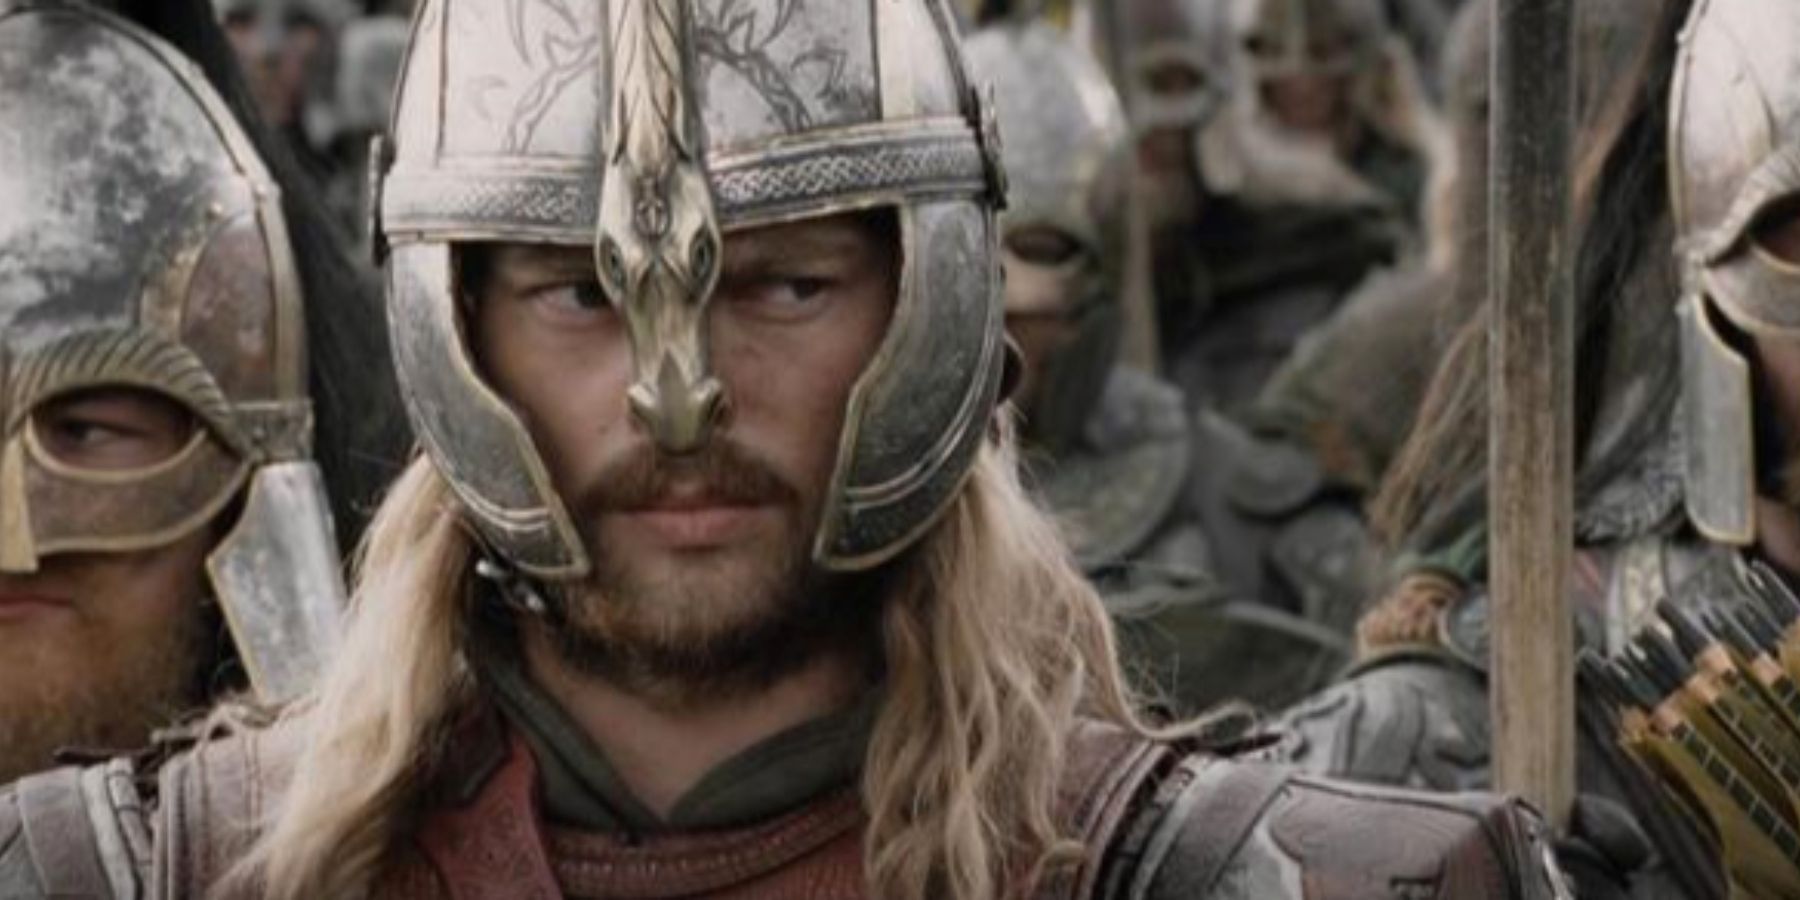 Eomer glanes to the side while standing with the Rohirrim in The Lord of the Rings